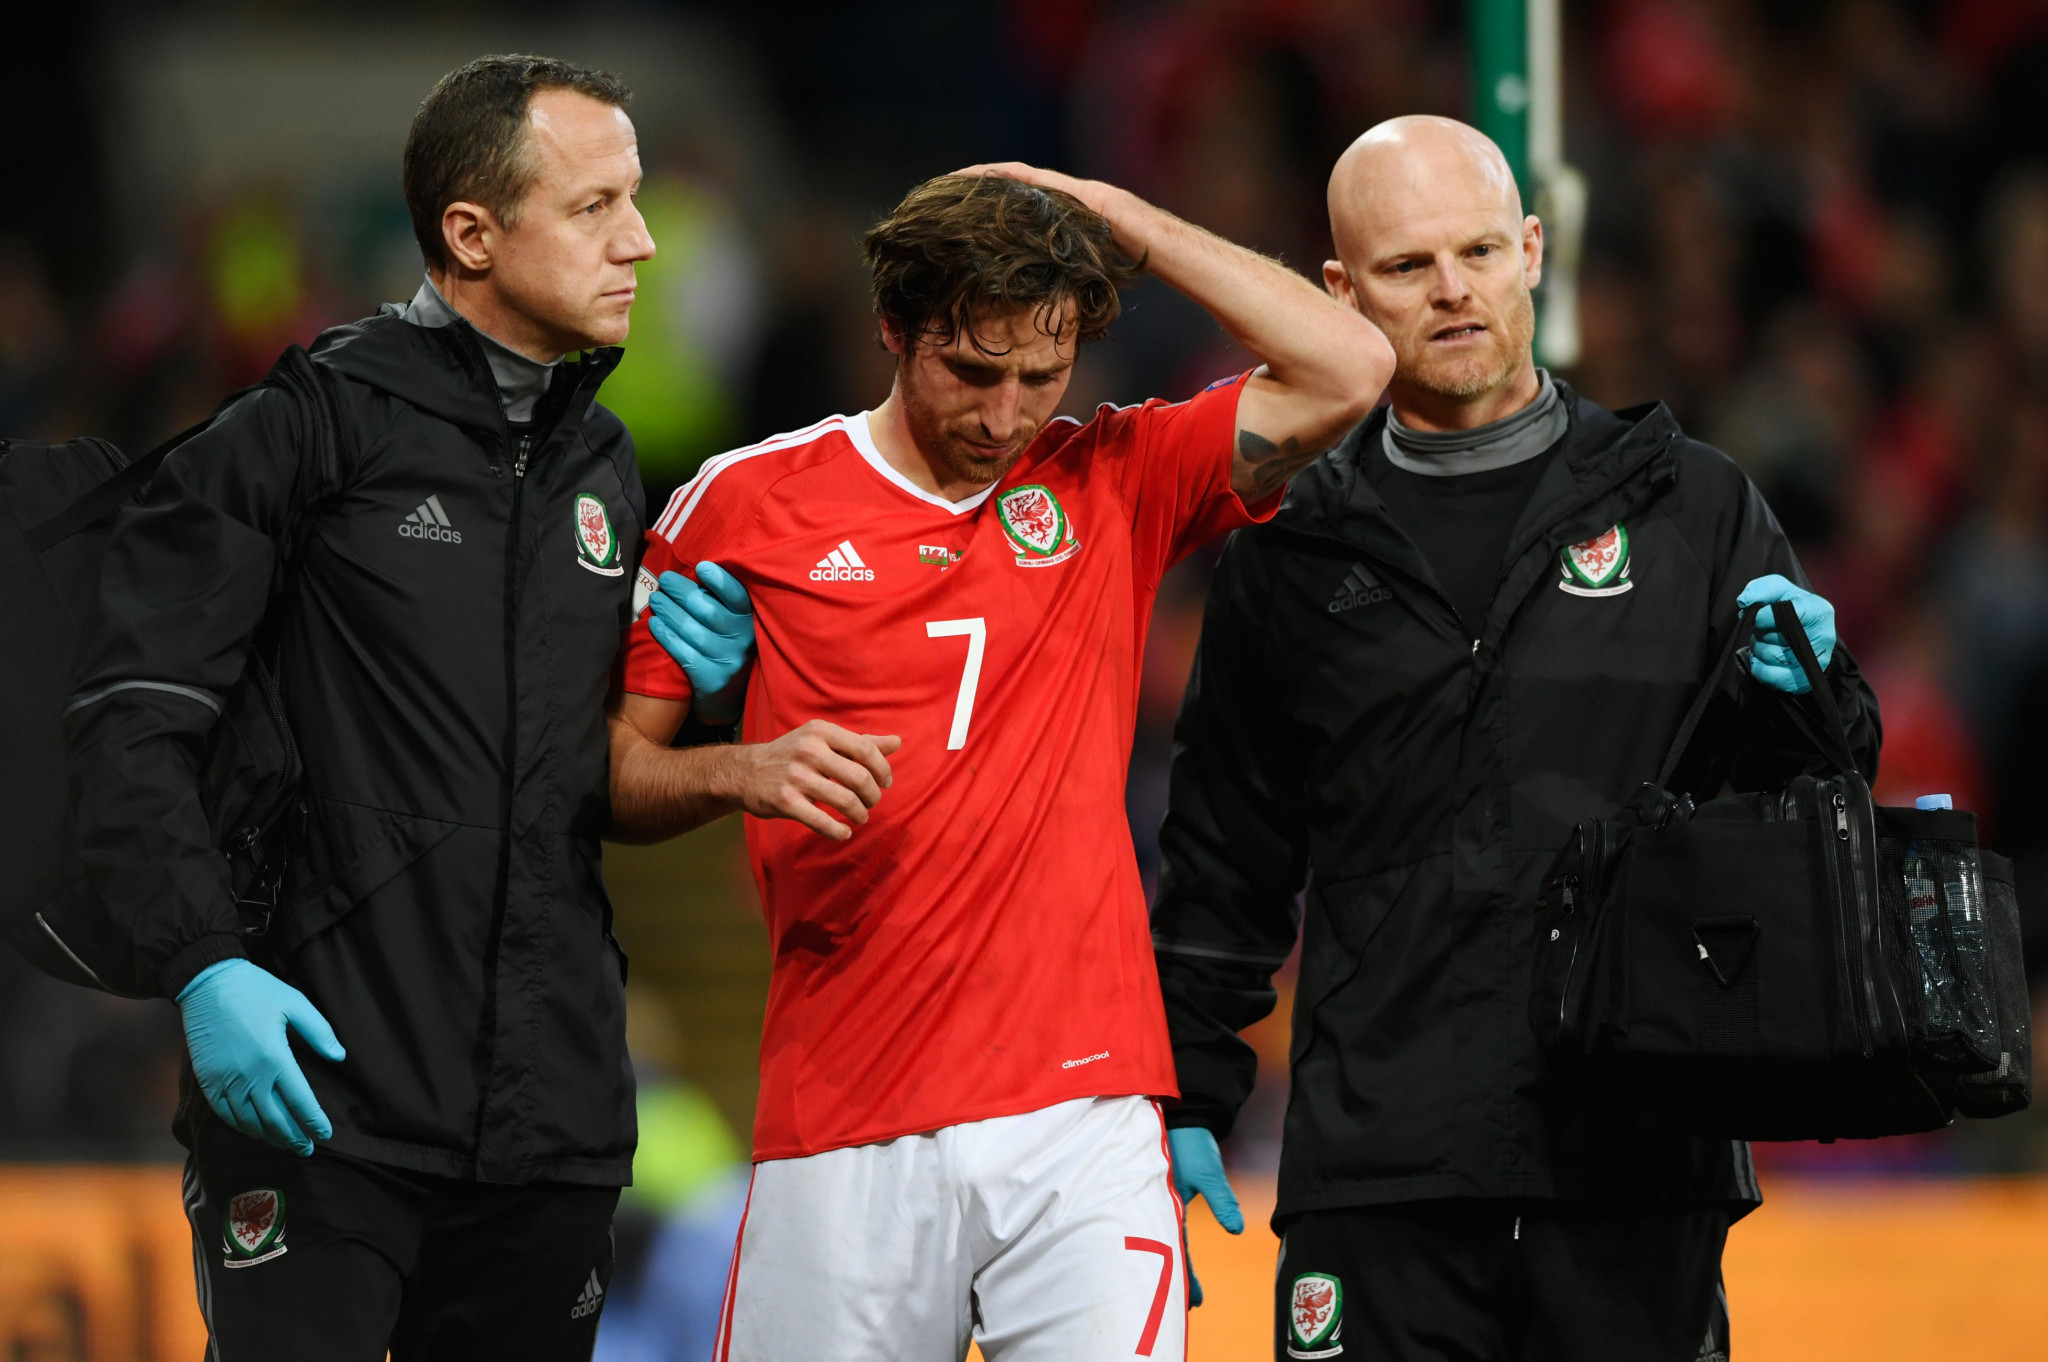 Additional substitutions for concussion in football could be trialed from January